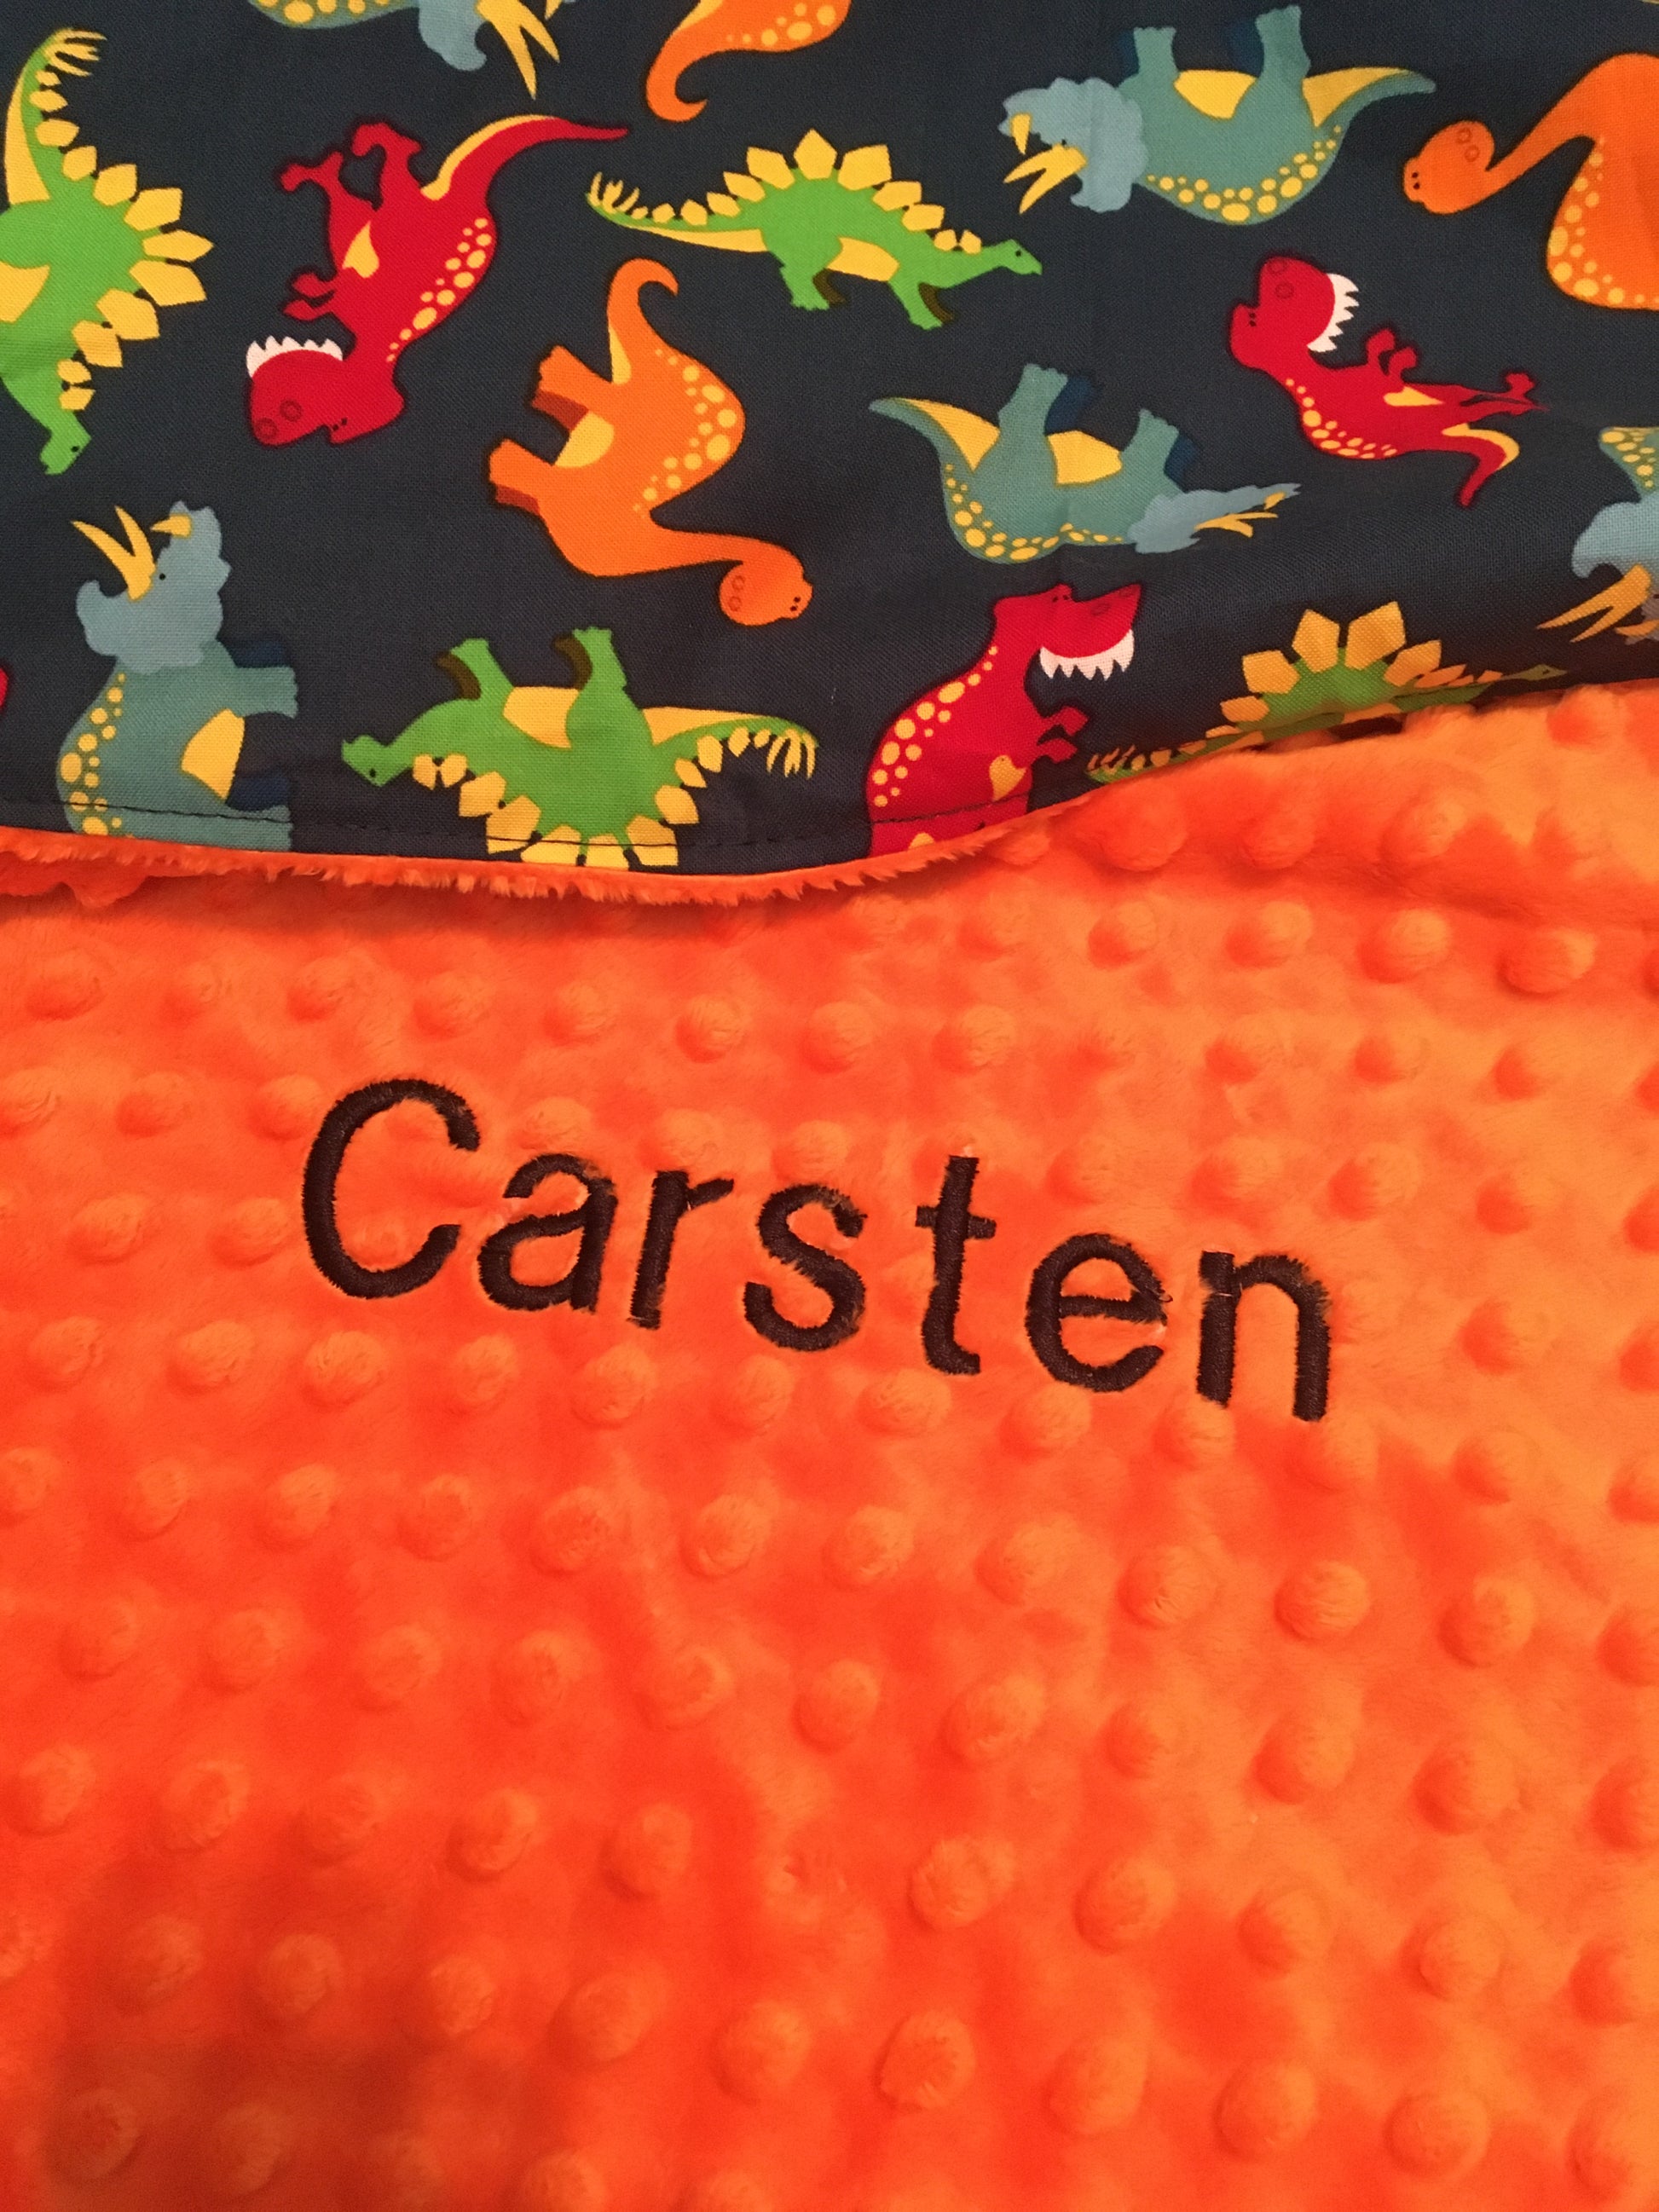 "Carsten" name embroidered on a dino minky blanket